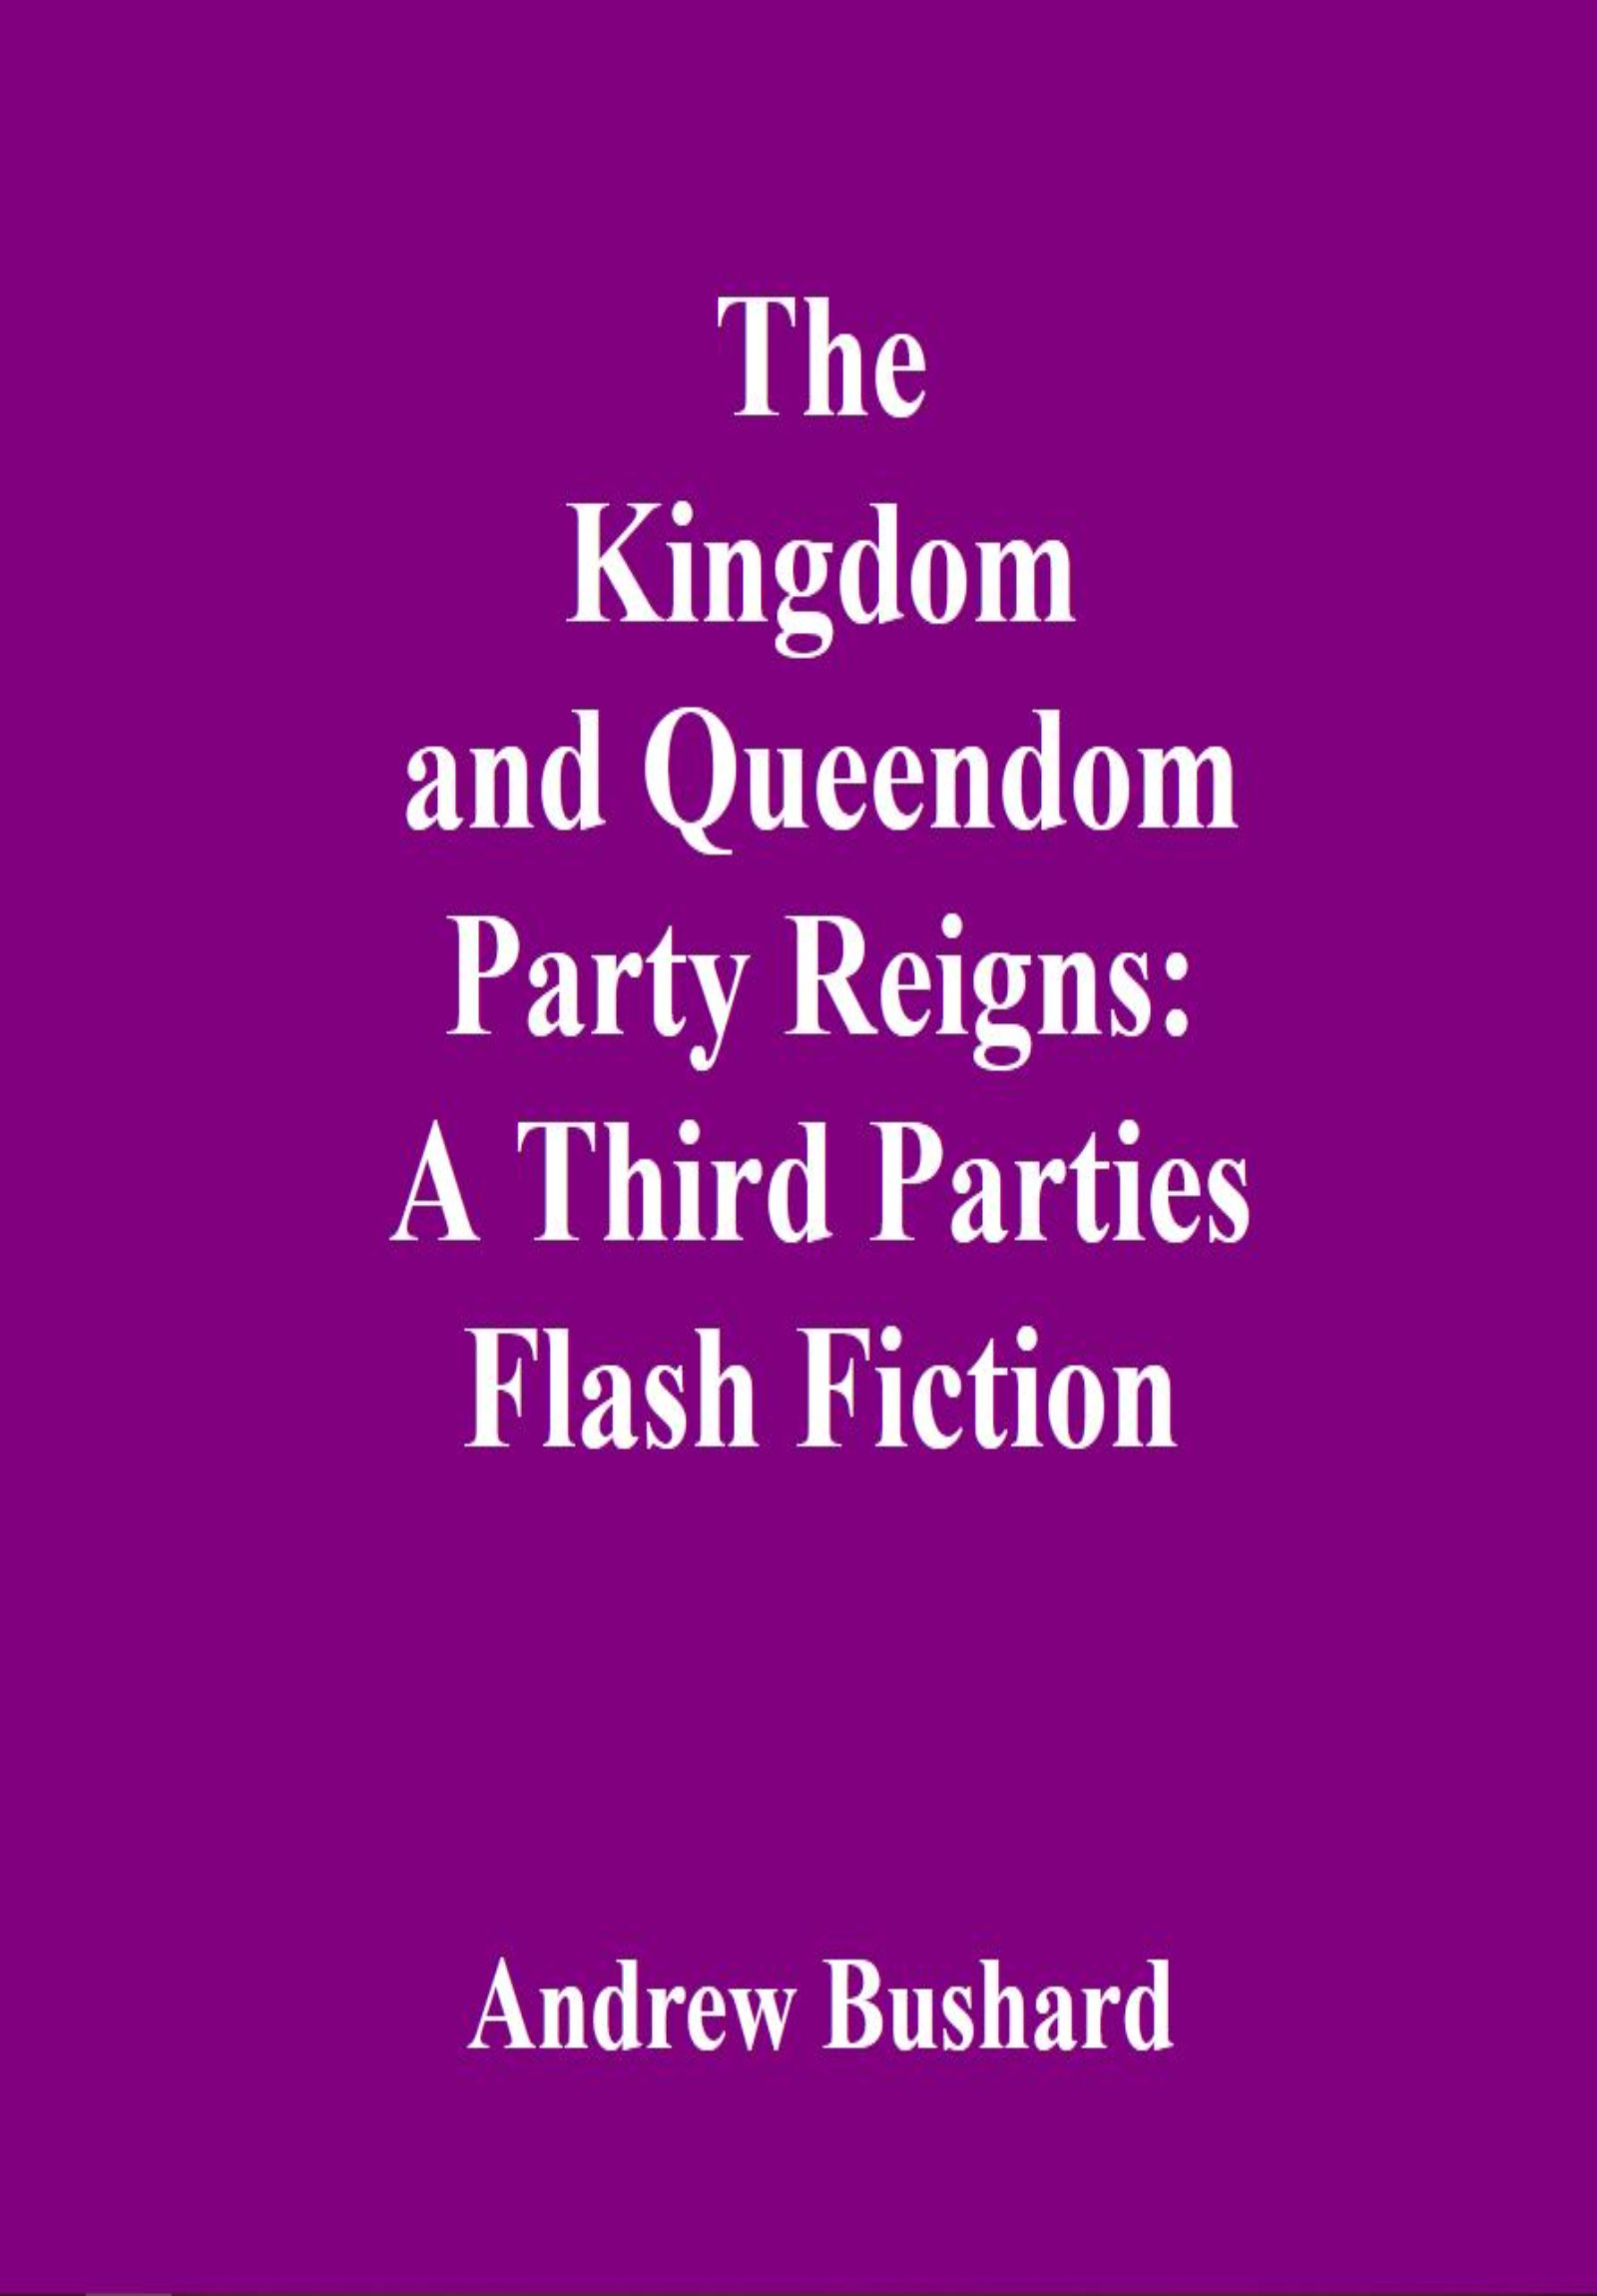 The Kingdom and Queendom Party Reigns: A Third Parties Flash Fiction